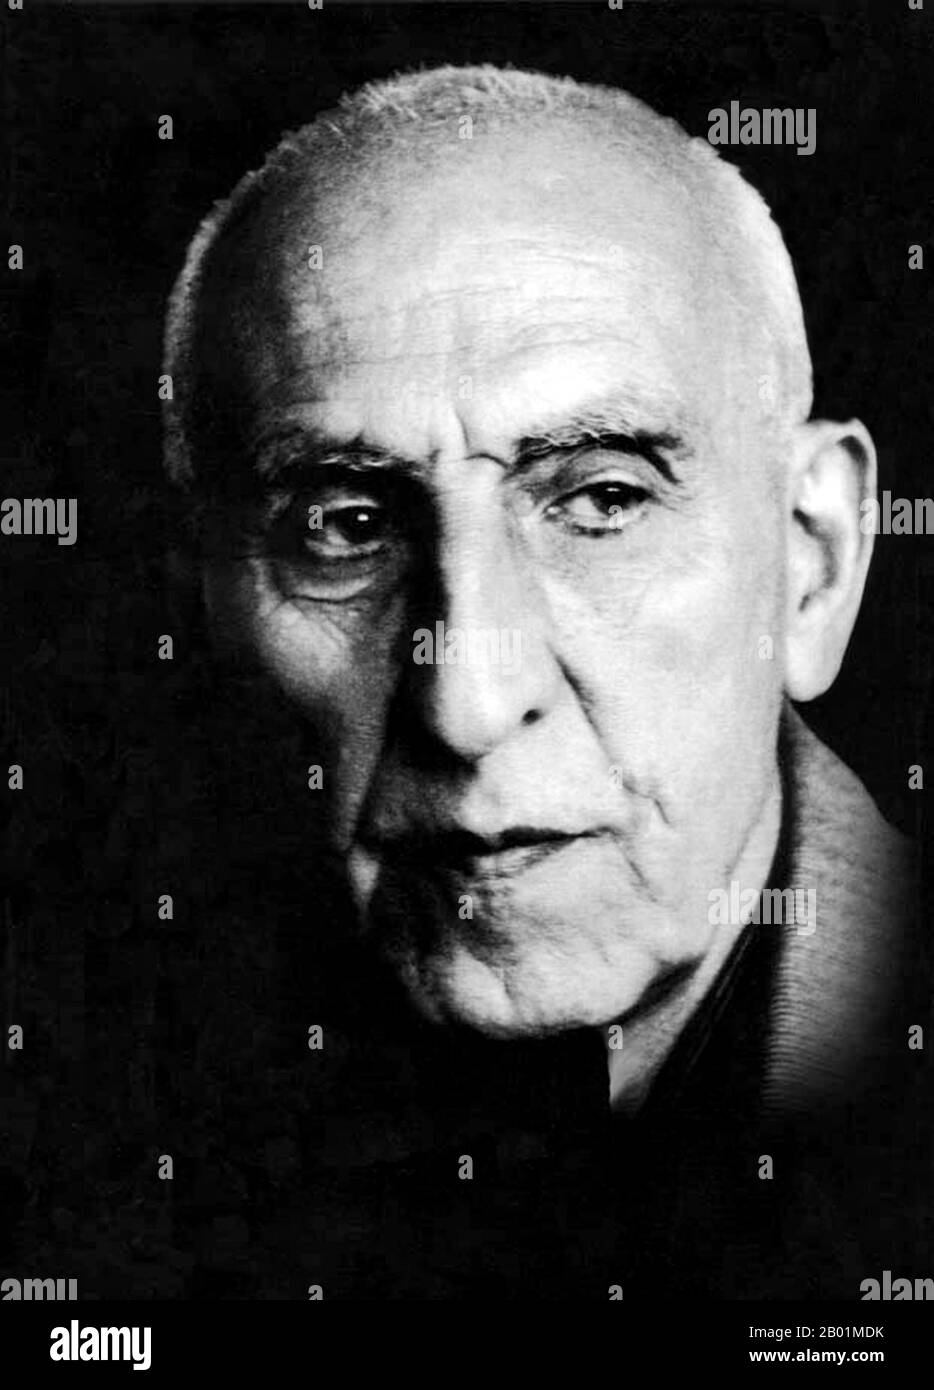 Iran/Persia: Mohammad Mosaddegh or Mosaddeq, also spelt Mosadeck or Musaddiq (16 June 1882 - 5 March 1967), Prime Minister of Iran from 1951 until being overthrown in a coup d'état in 1953, c. 1950s.  The Mossadeq administration introduced a wide range of social reforms but was most notable for its nationalisation of the Iranian oil industry, which had been under British control since 1913 through the Anglo-Persian Oil Company.  Mosaddegh was removed from power in a coup on 19 August 1953, organised and carried out by the United States CIA at the request of British MI6. Stock Photo